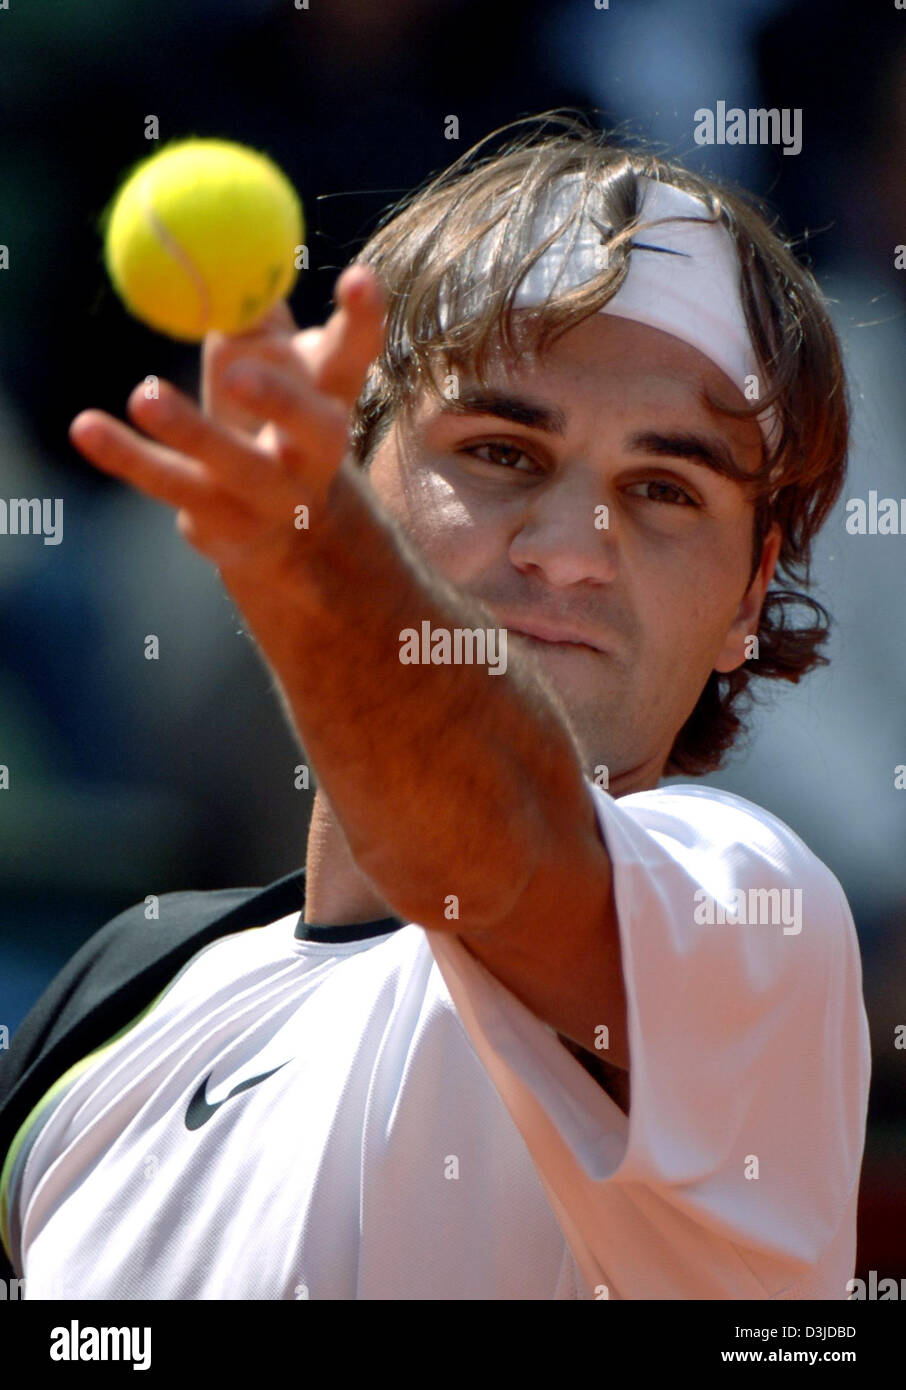 (dpa) - Swiss tennis pro Roger Federer serves the ball during his semi-final match against Russian Nikolaj Davidenko at the ATP Tennis Master Tournament in Hamburg, Germany, 14 May 2005. Federer won the match 6-3 and 6-4. Stock Photo